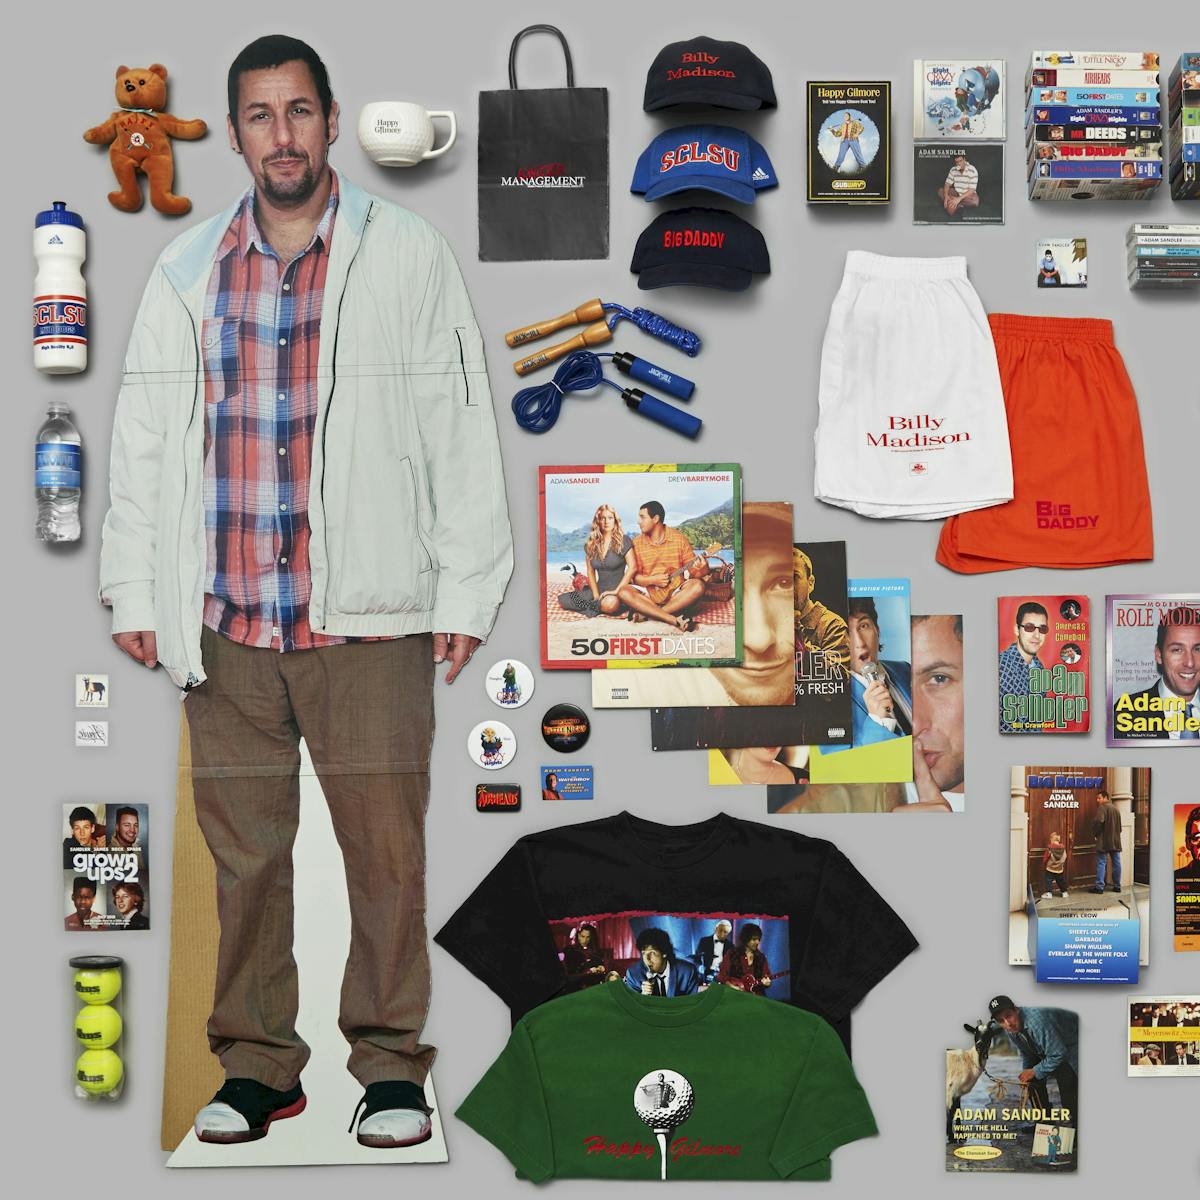 The Adam Sandler starter pack, including long gym shorts, baseball hats, t-shirts, waterbottles, sports balls, and movie posters.  